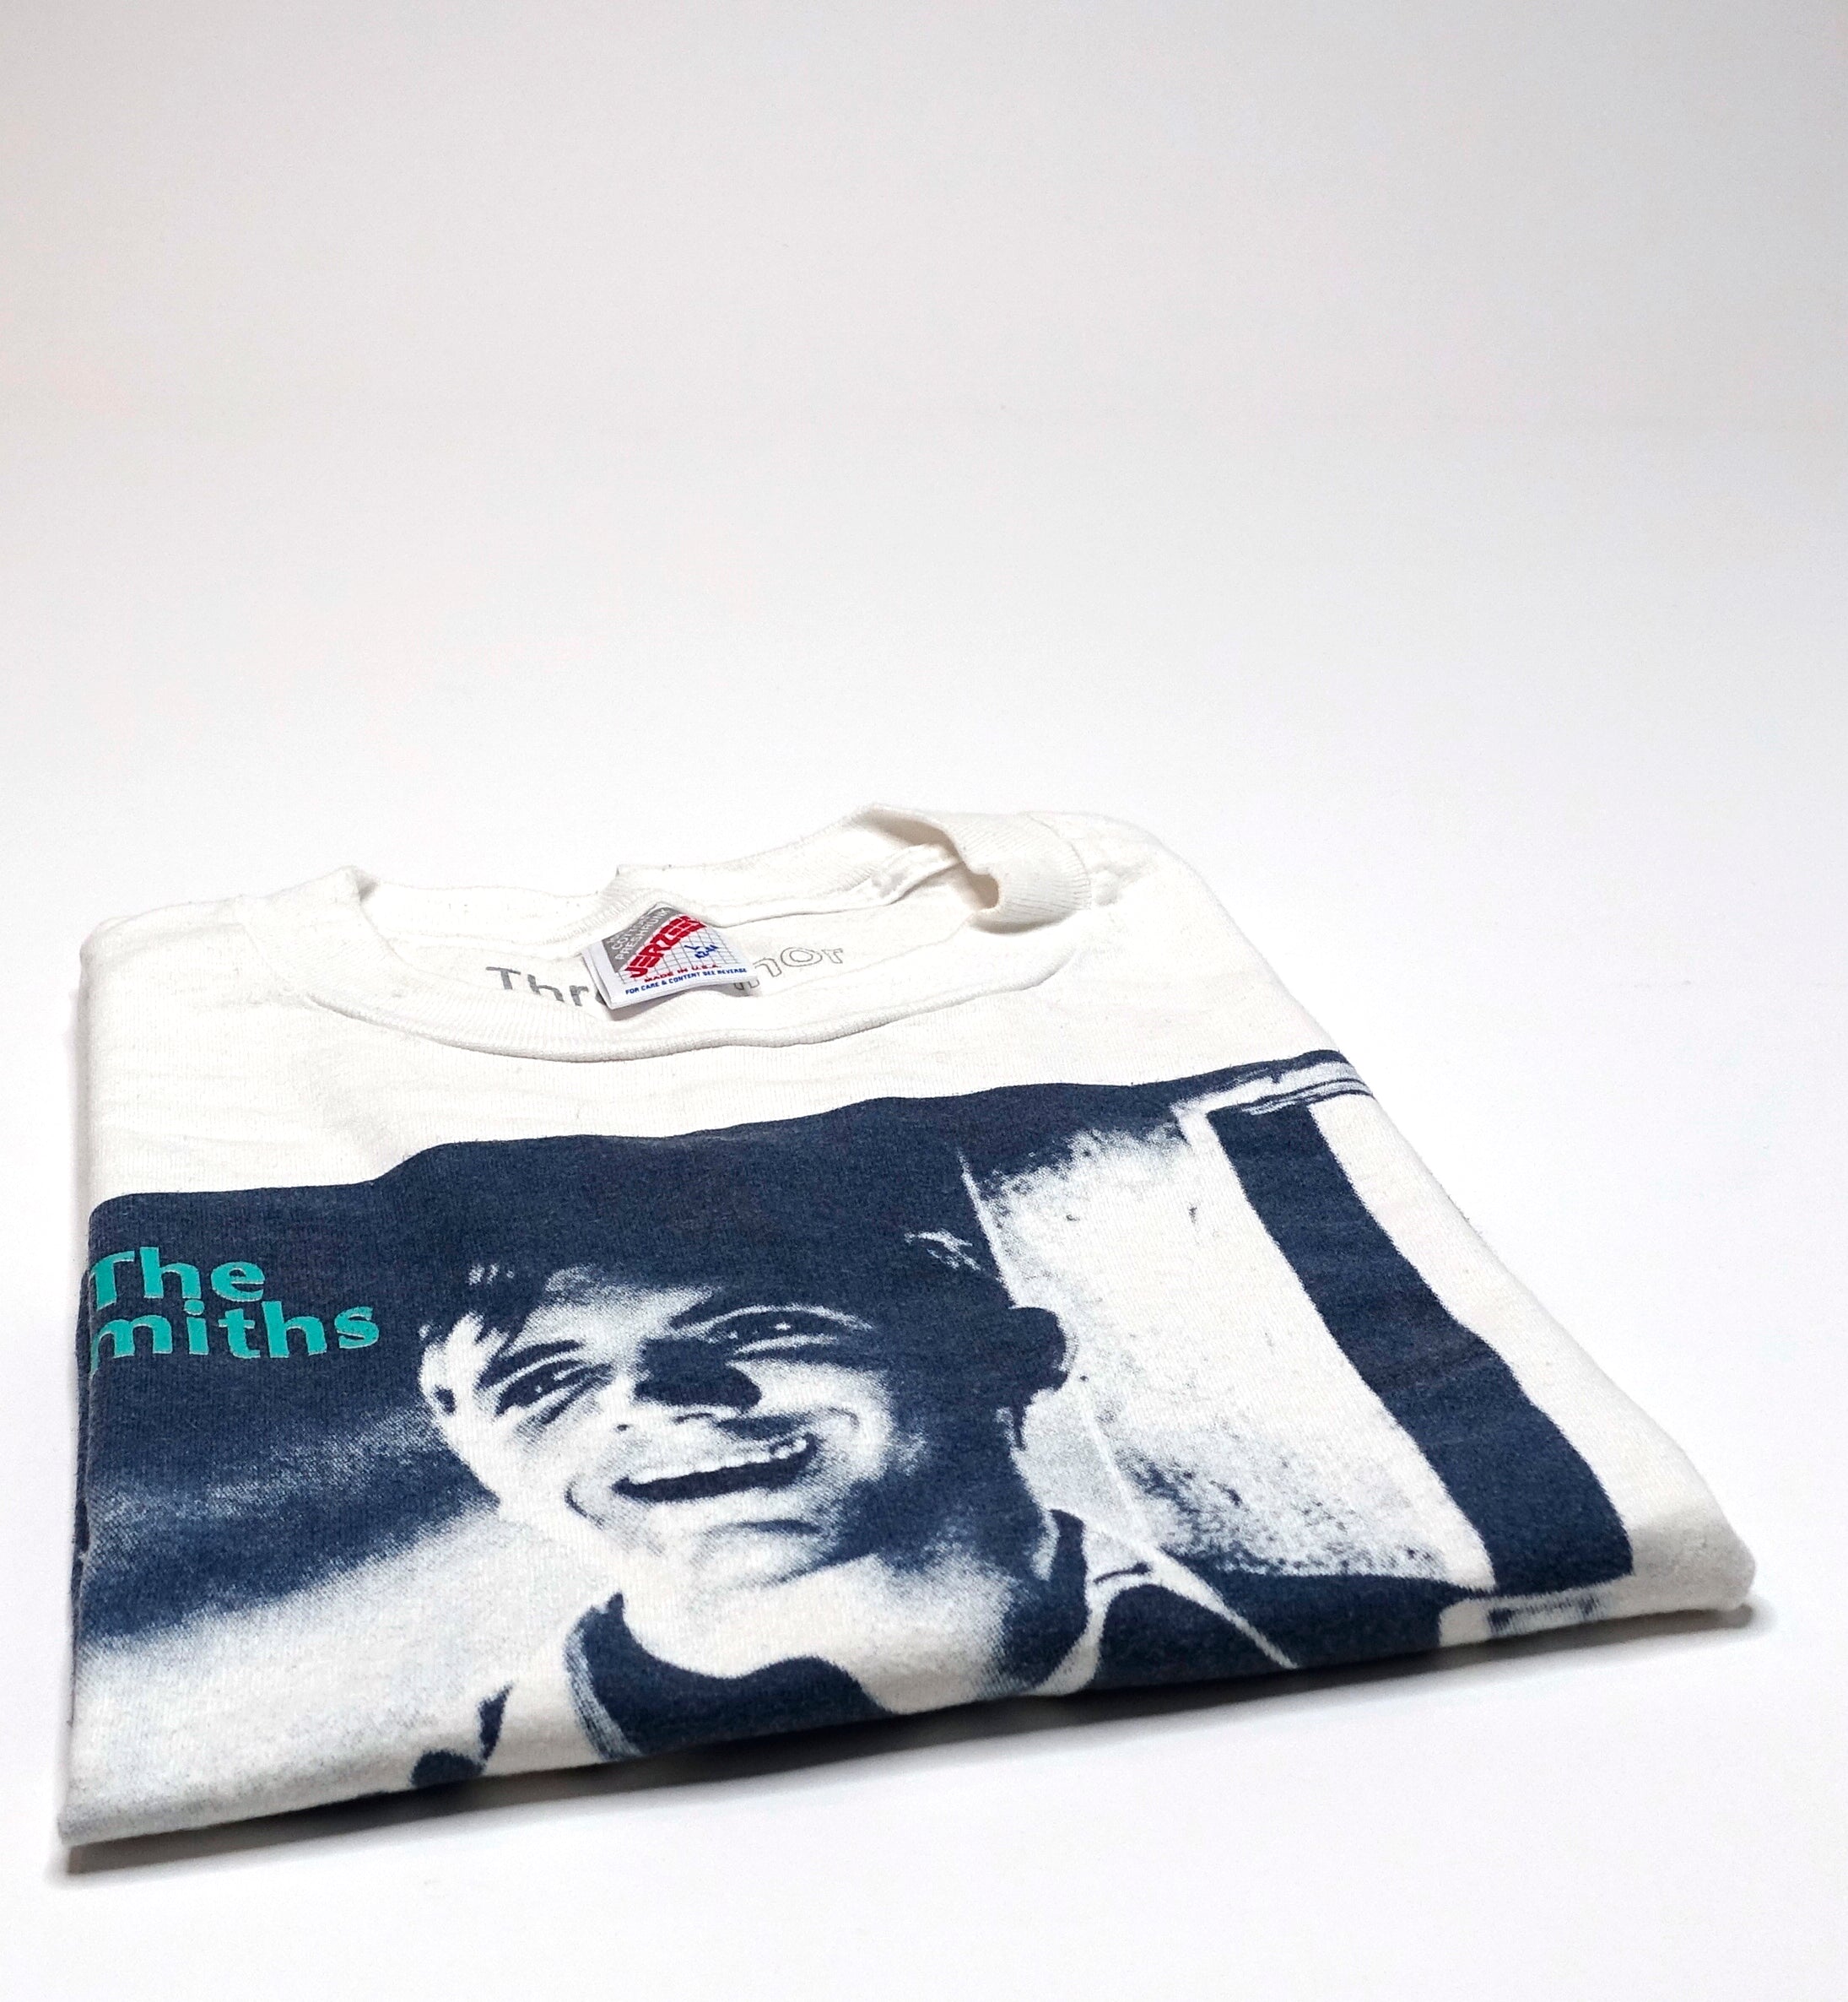 the Smiths - What Difference Does It Make? White Version Shirt (Bootleg by Me) Size Large